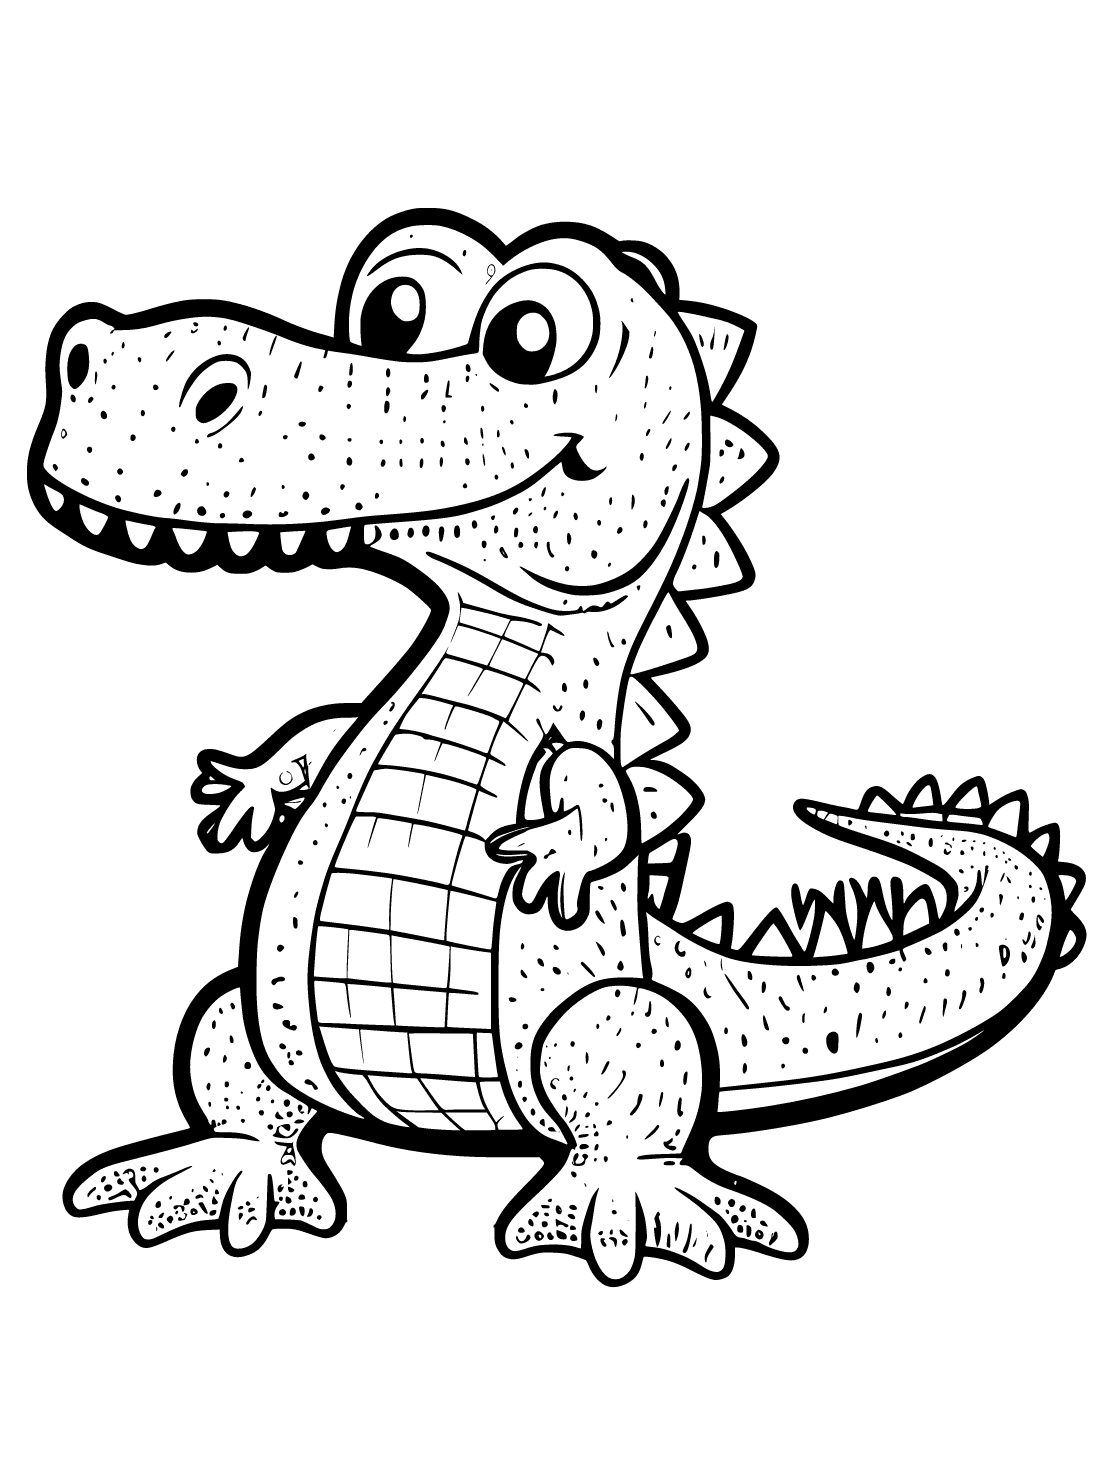 Alligators black and white coloring pages